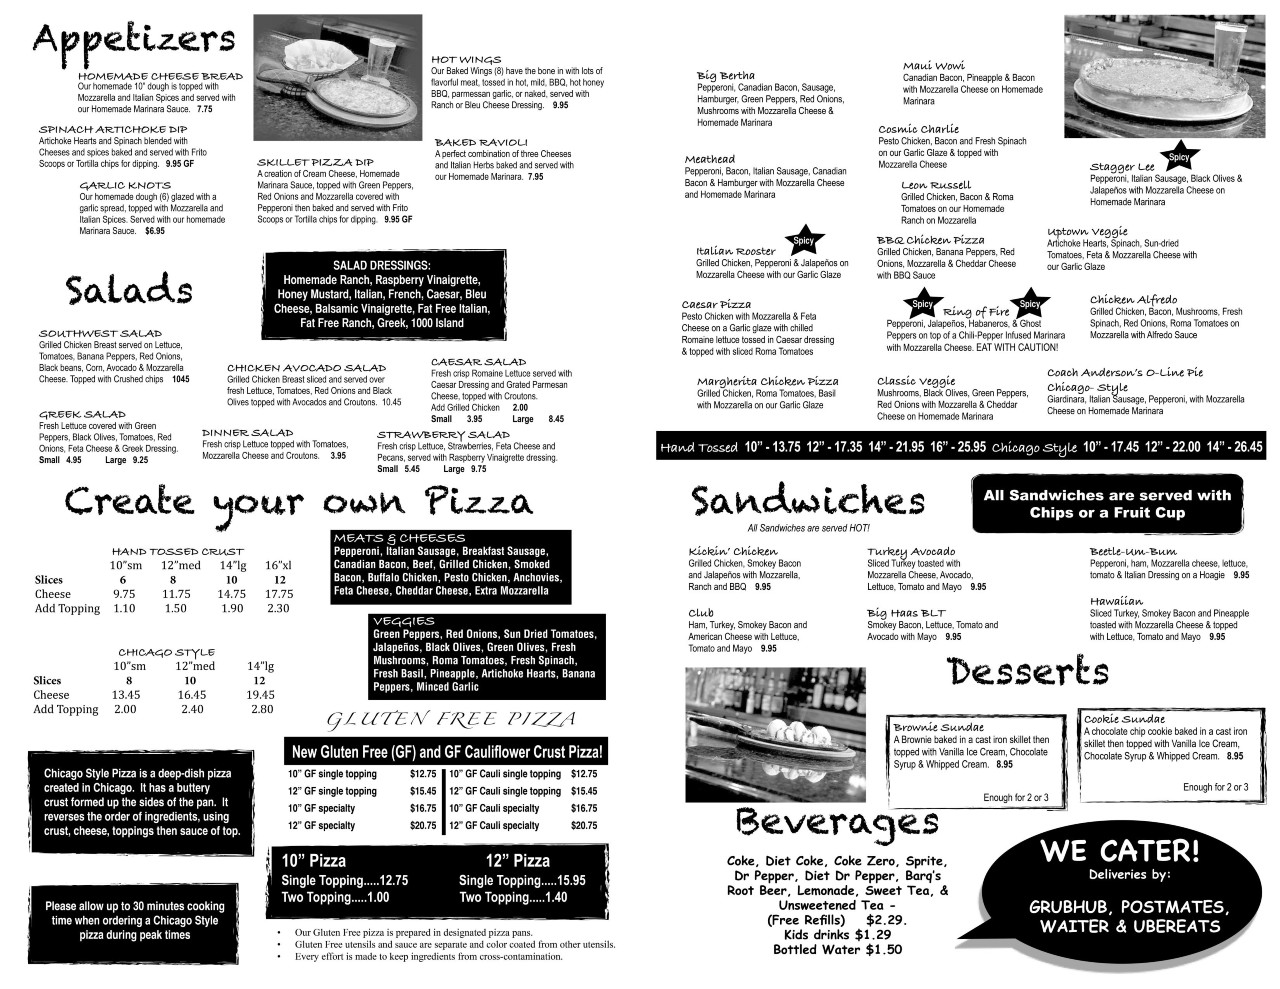 Marleys Pizza Fayetteville - To Go Menu Page 2